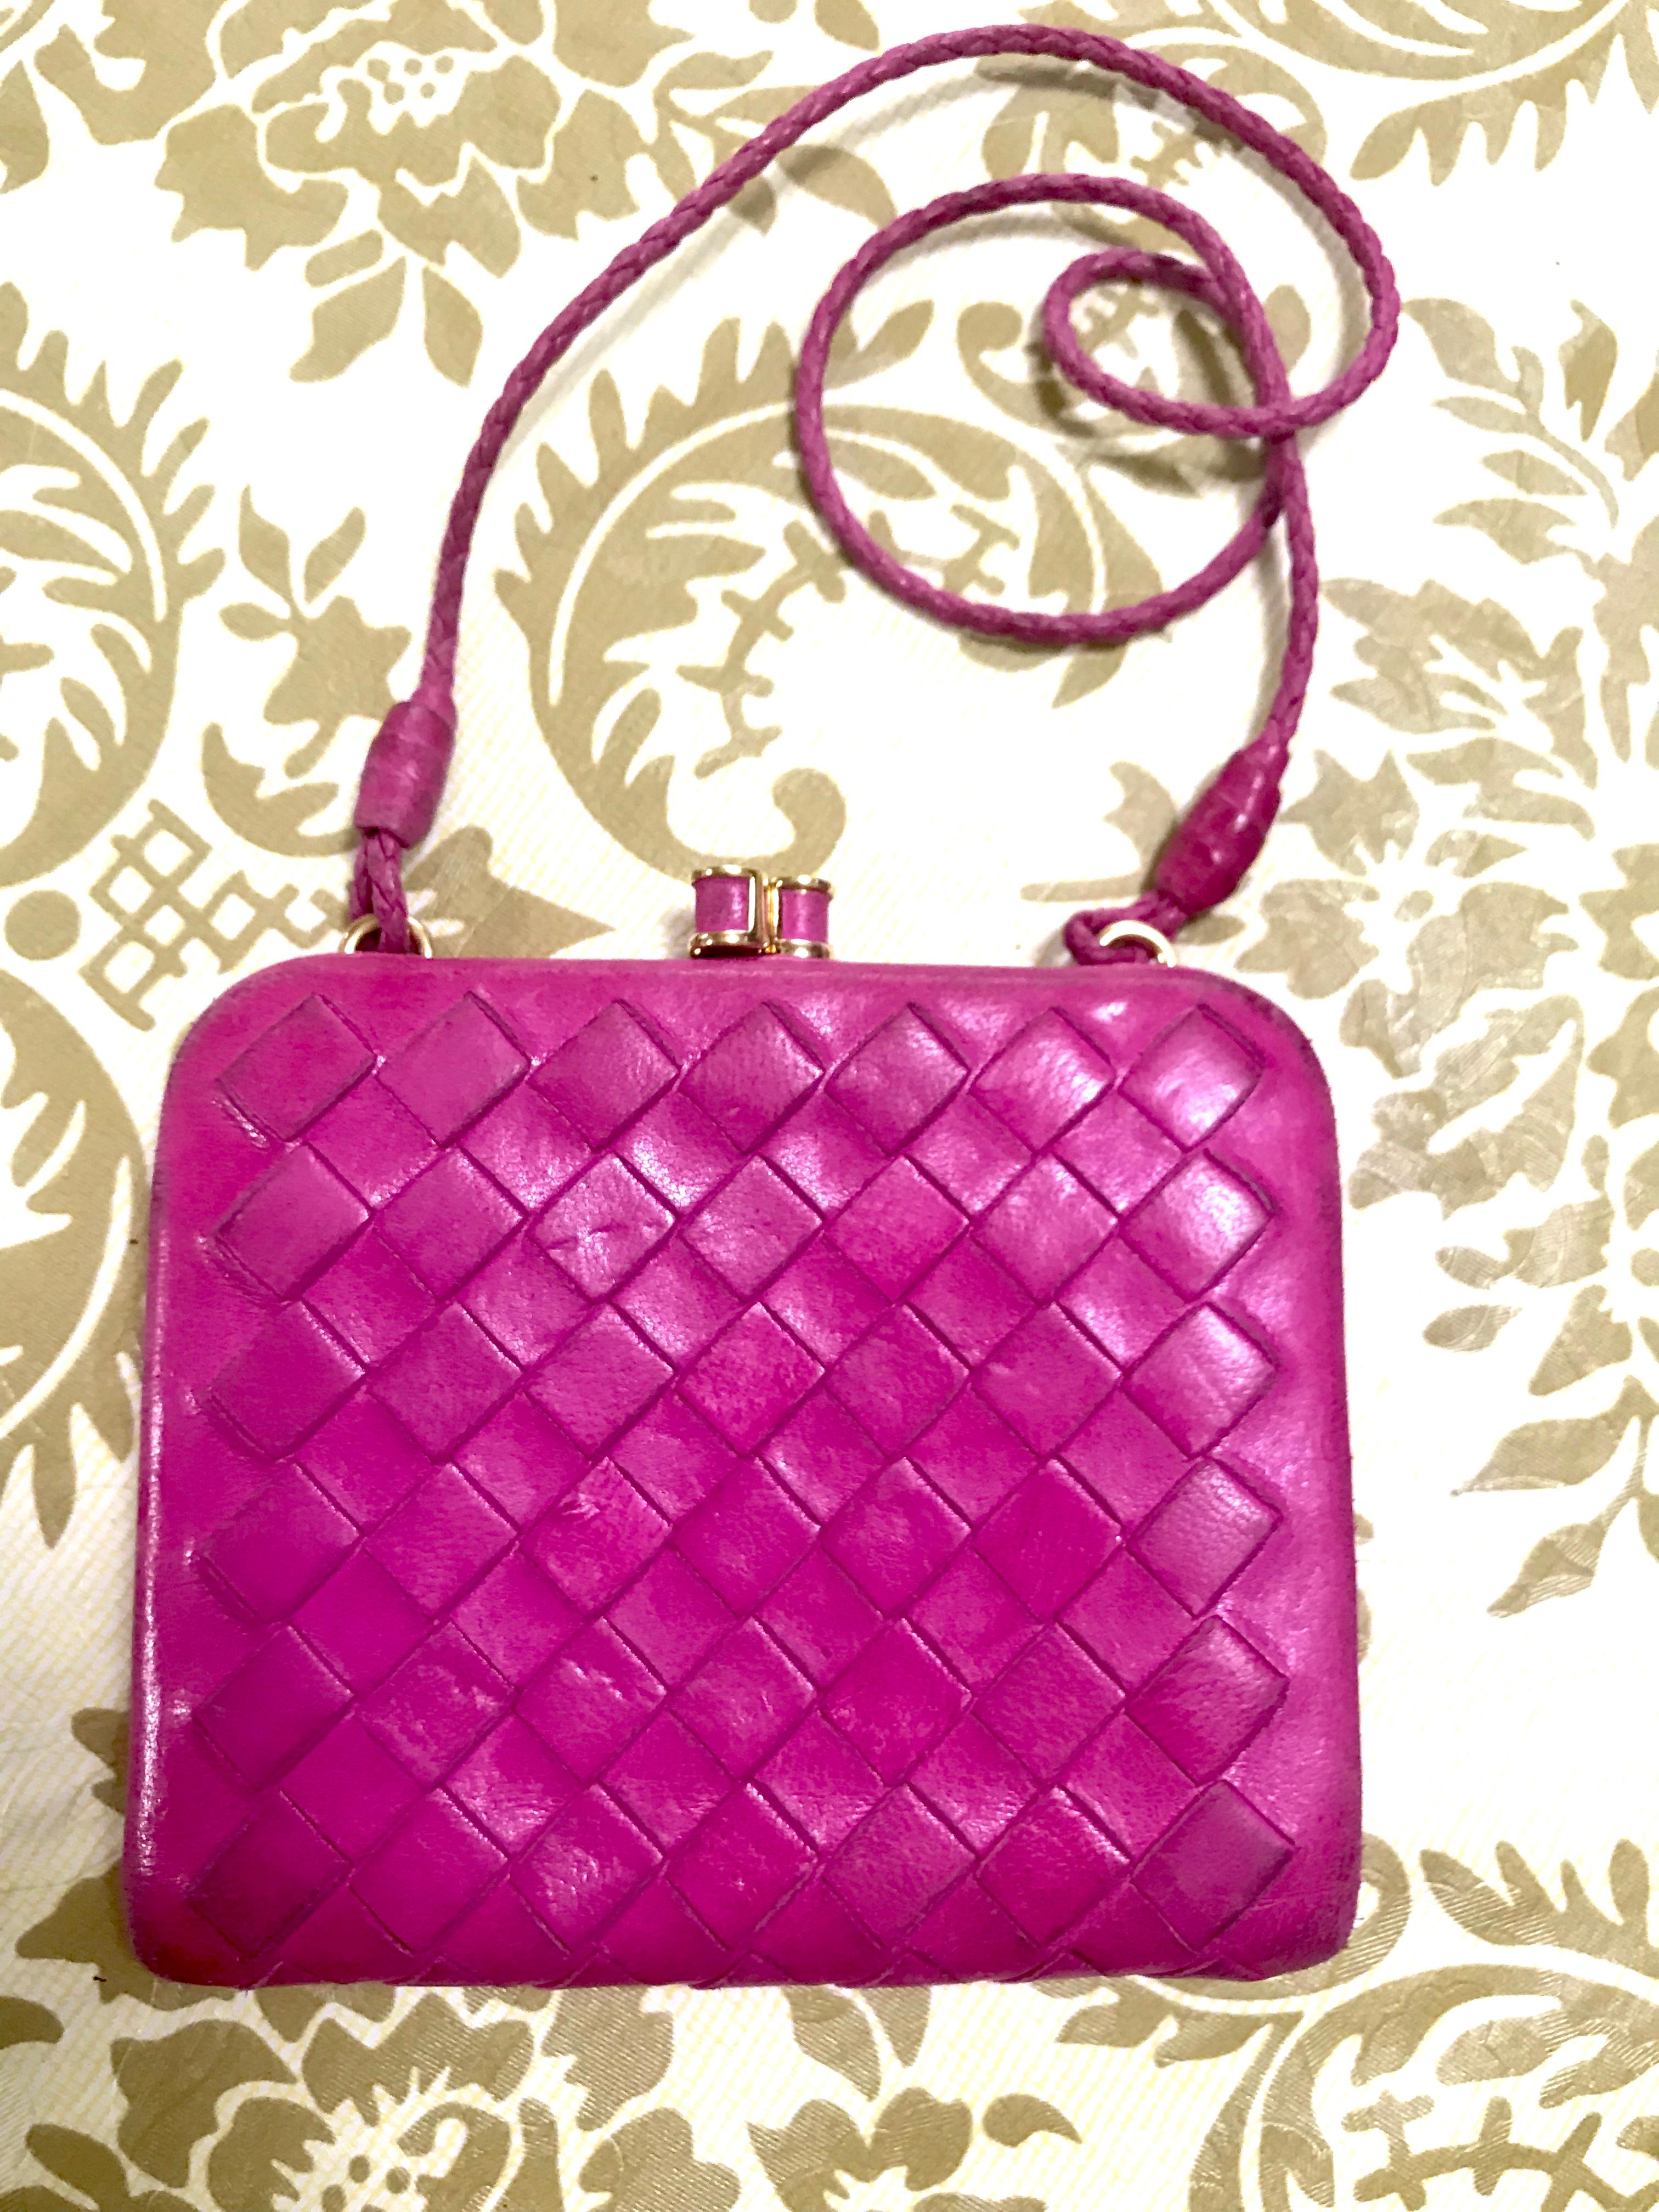 1990s. Vintage Bottega Veneta intrecciato woven leather wallet, coin case, purse in hot pink. Fun and hot gift

Bottega Veneta's iconic style  intrecciato coin wallet purse in hot pink! 
You can easily grab it with the strap in your bag or to